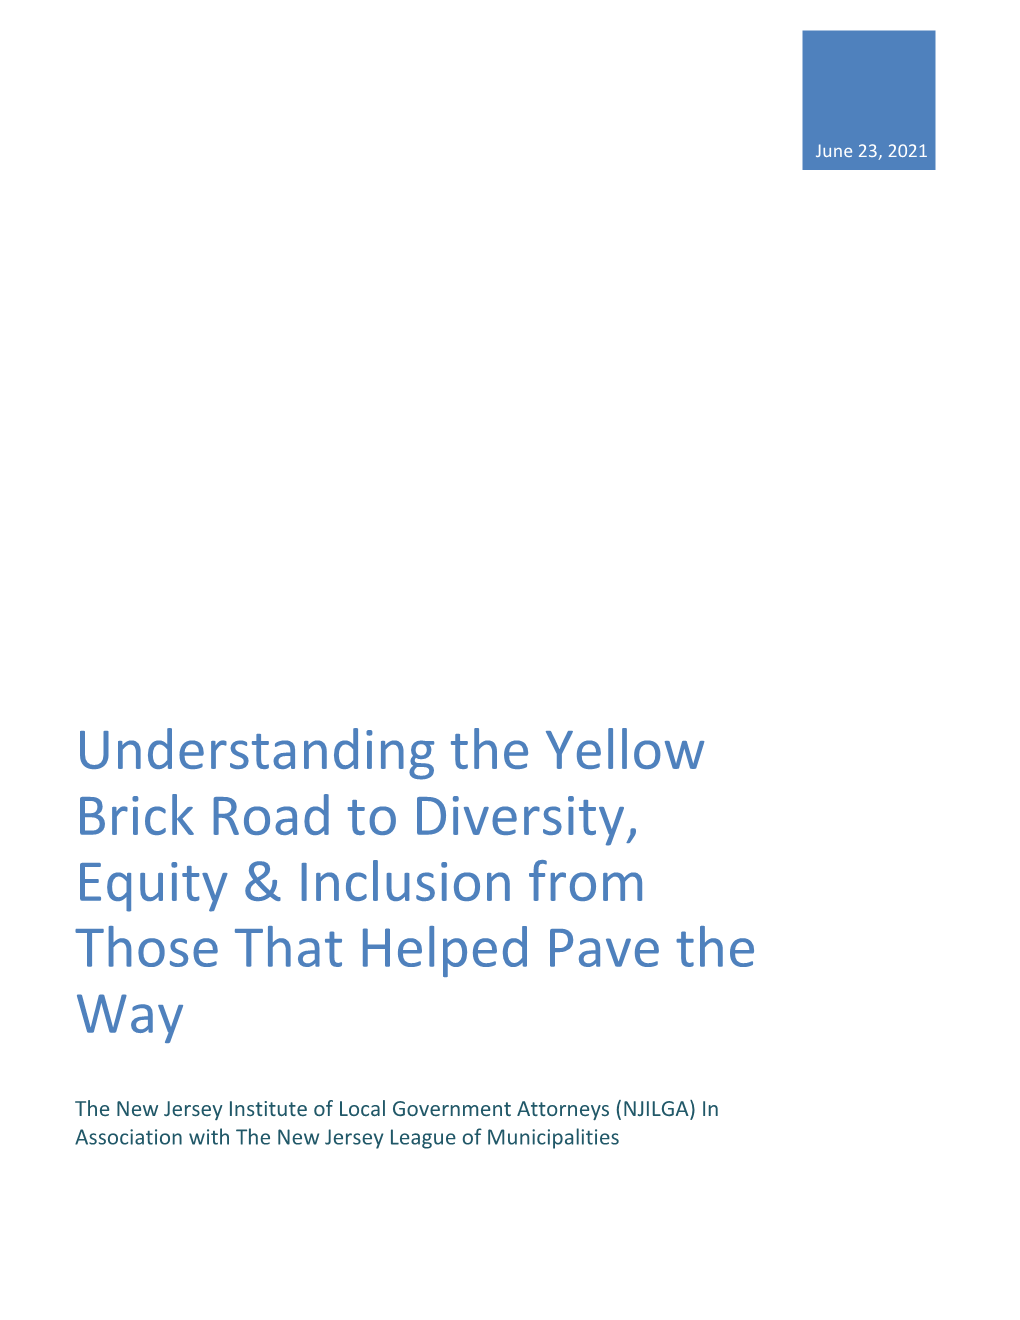 Understanding the Yellow Brick Road to Diversity, Equity & Inclusion From